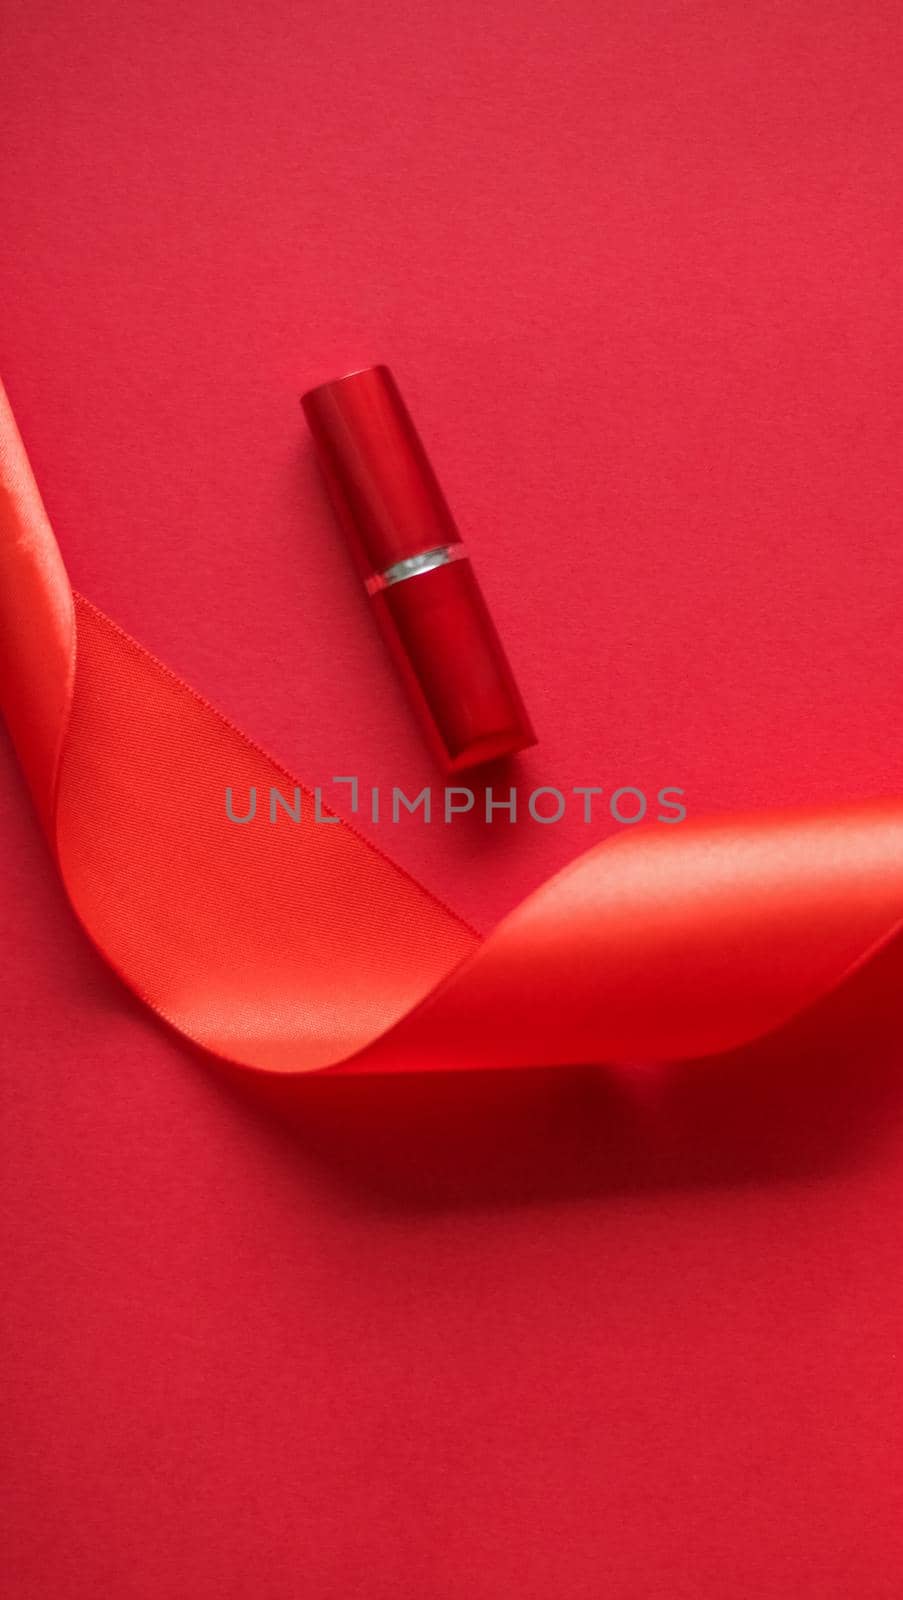 Cosmetic branding, glamour lip gloss and shopping sale concept - Luxury lipstick and silk ribbon on red holiday background, make-up and cosmetics flatlay for beauty brand product design